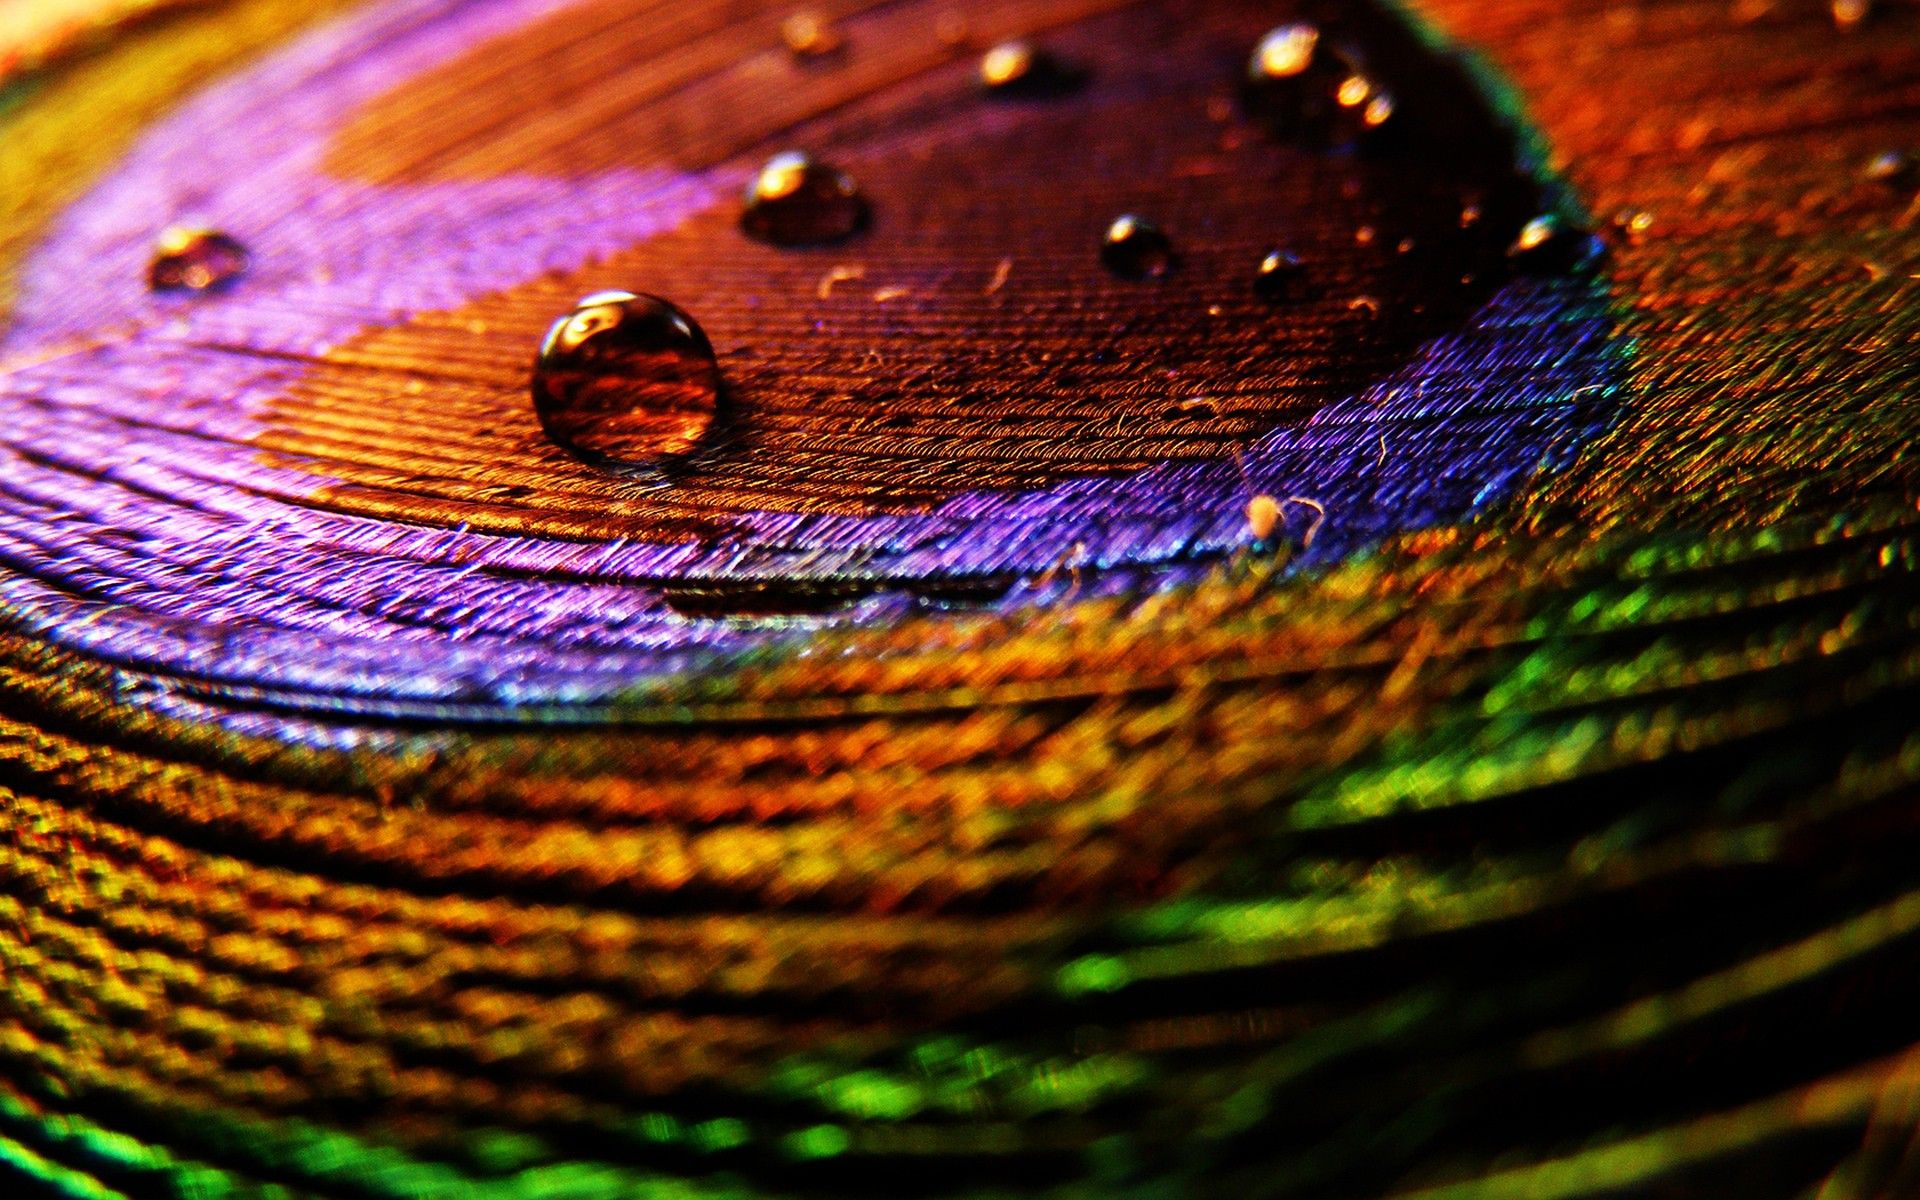 Peacock Feathers Macro wallpapers and stock photos in good quality ...